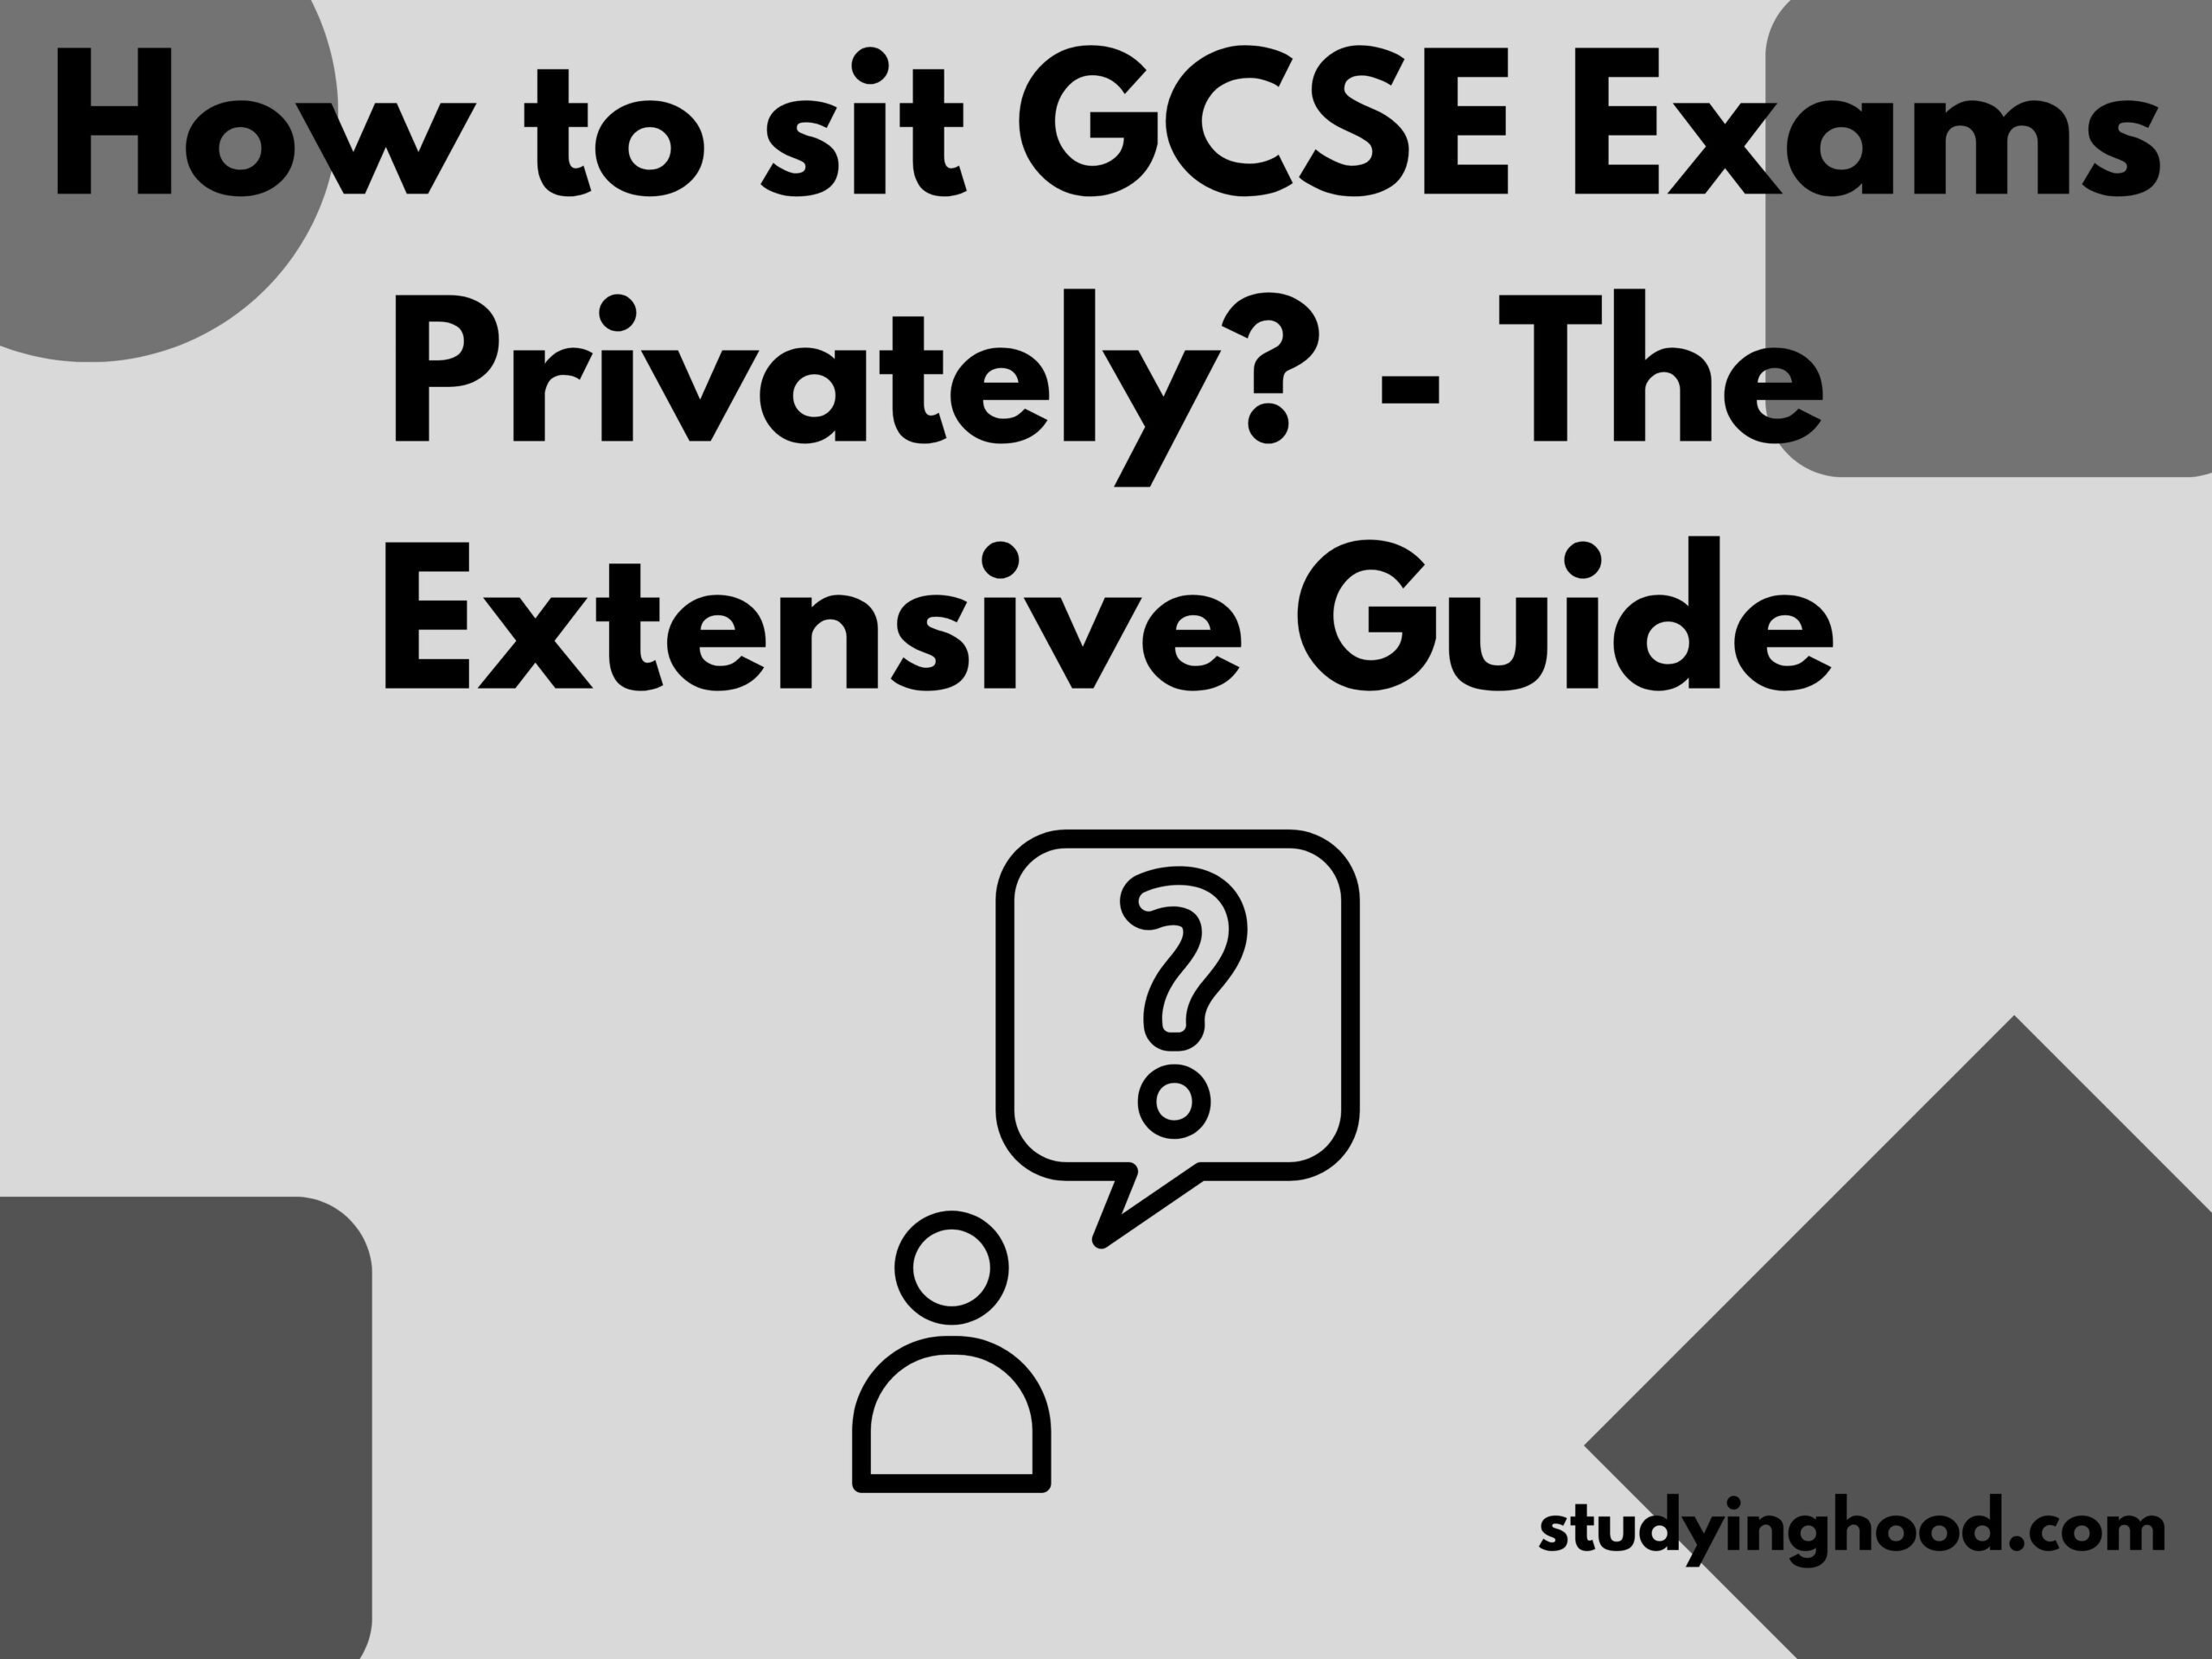 How to sit GCSE Exams Privately? - The Extensive Guide